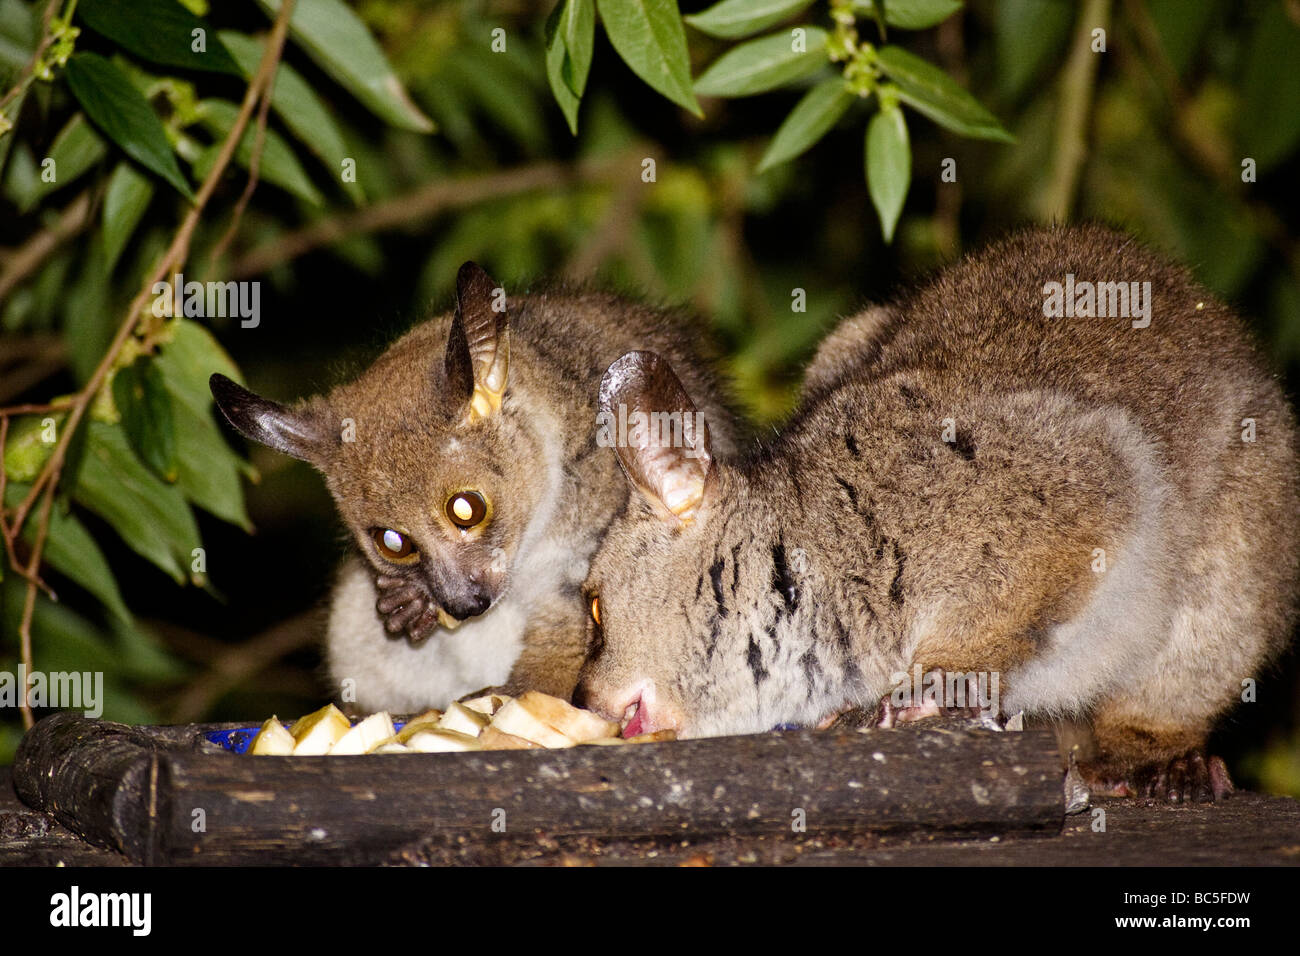 Bushbabies coming out to feed at a travellers hostel near Umfolozi national park, South Africa Stock Photo